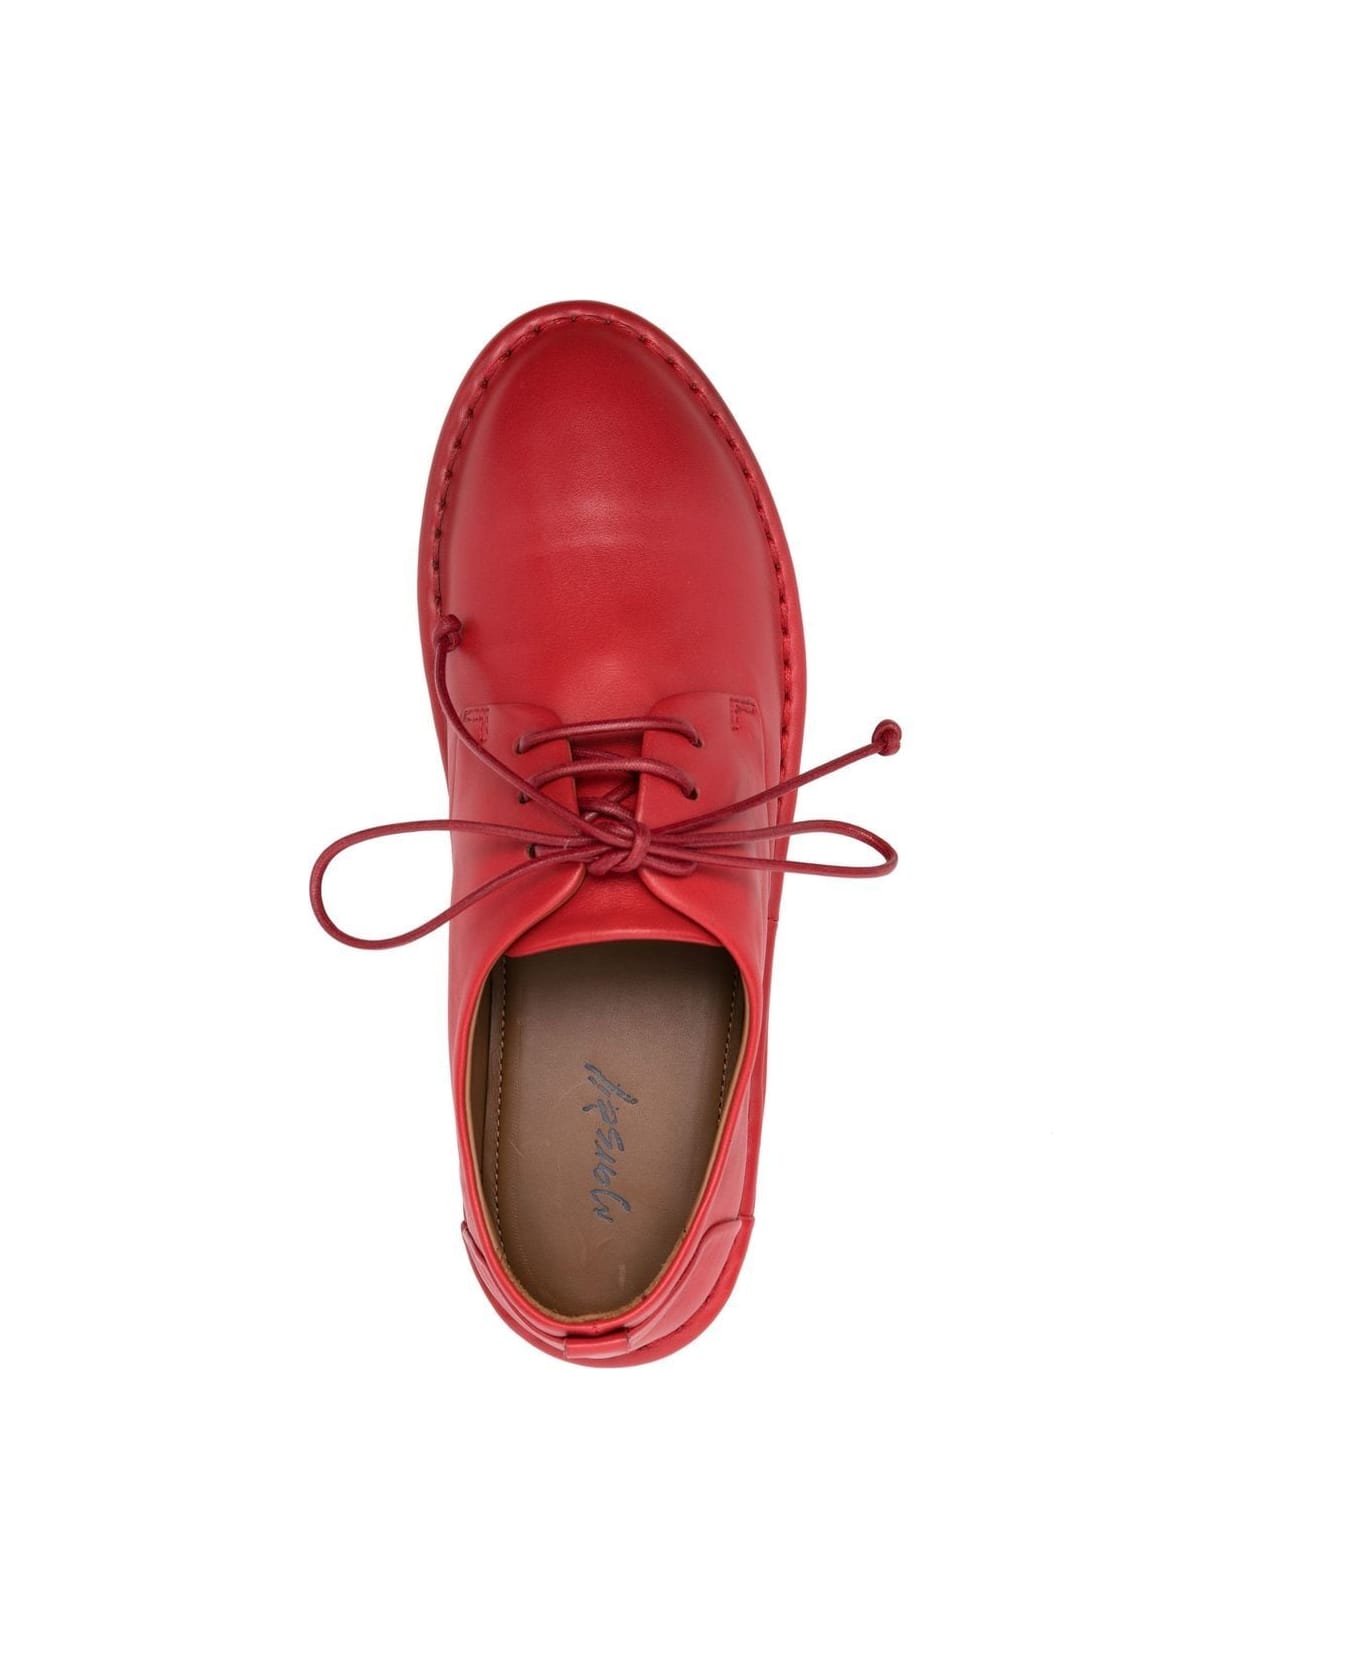 Marsell Sancrispa Derby Shoes - Red